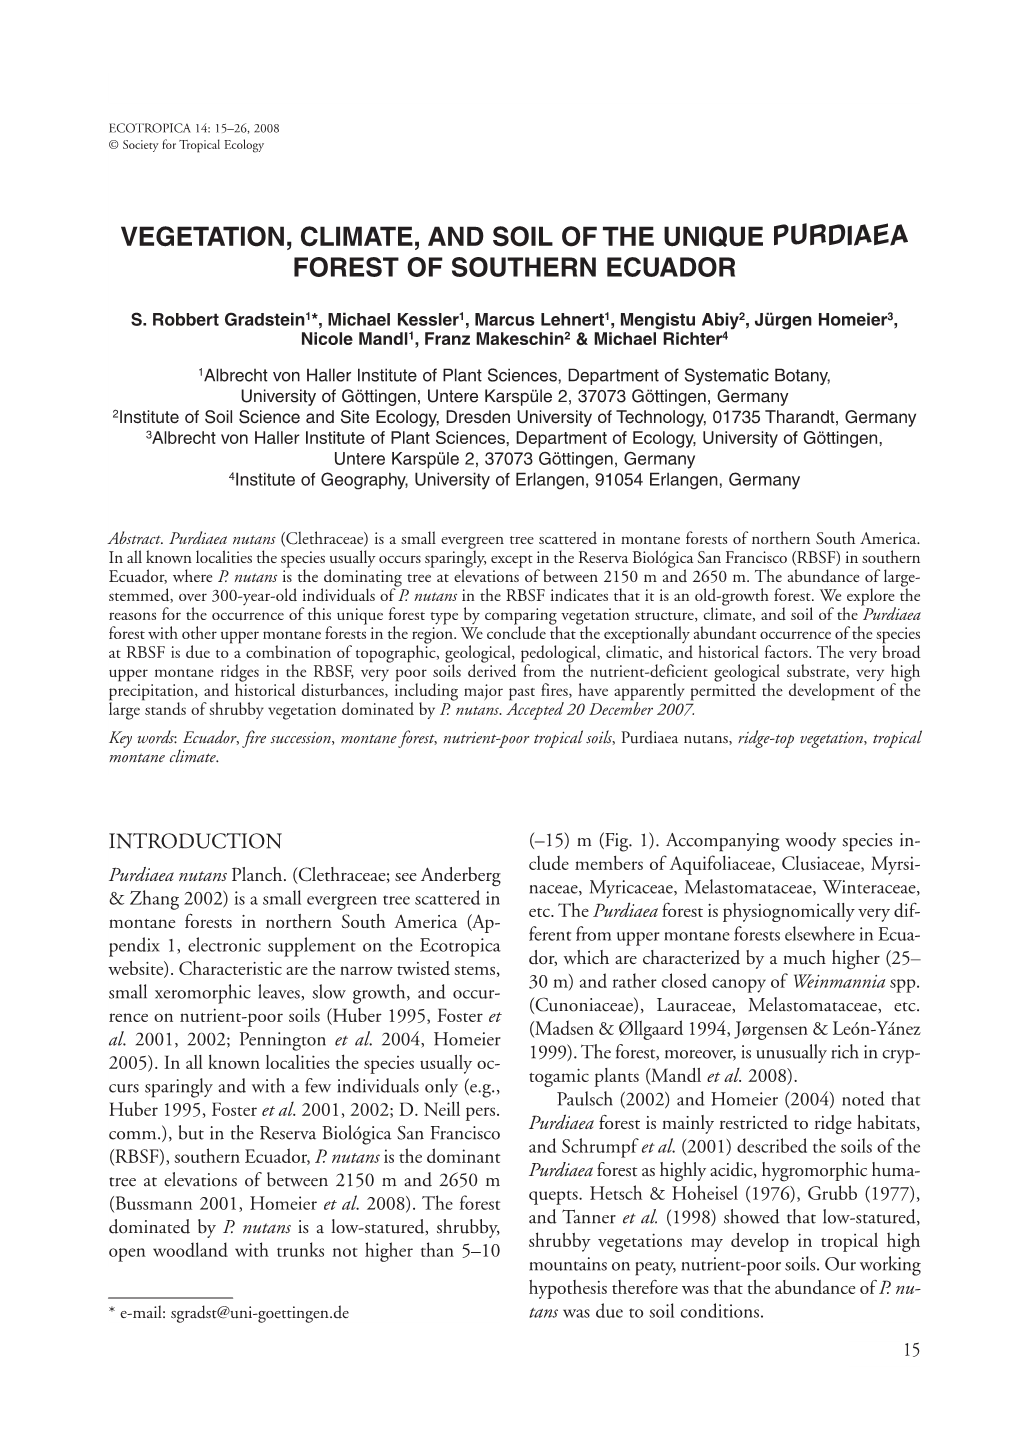 Vegetation, Climate, and Soil of the Unique Purdiaea Forest of Southern Ecuador